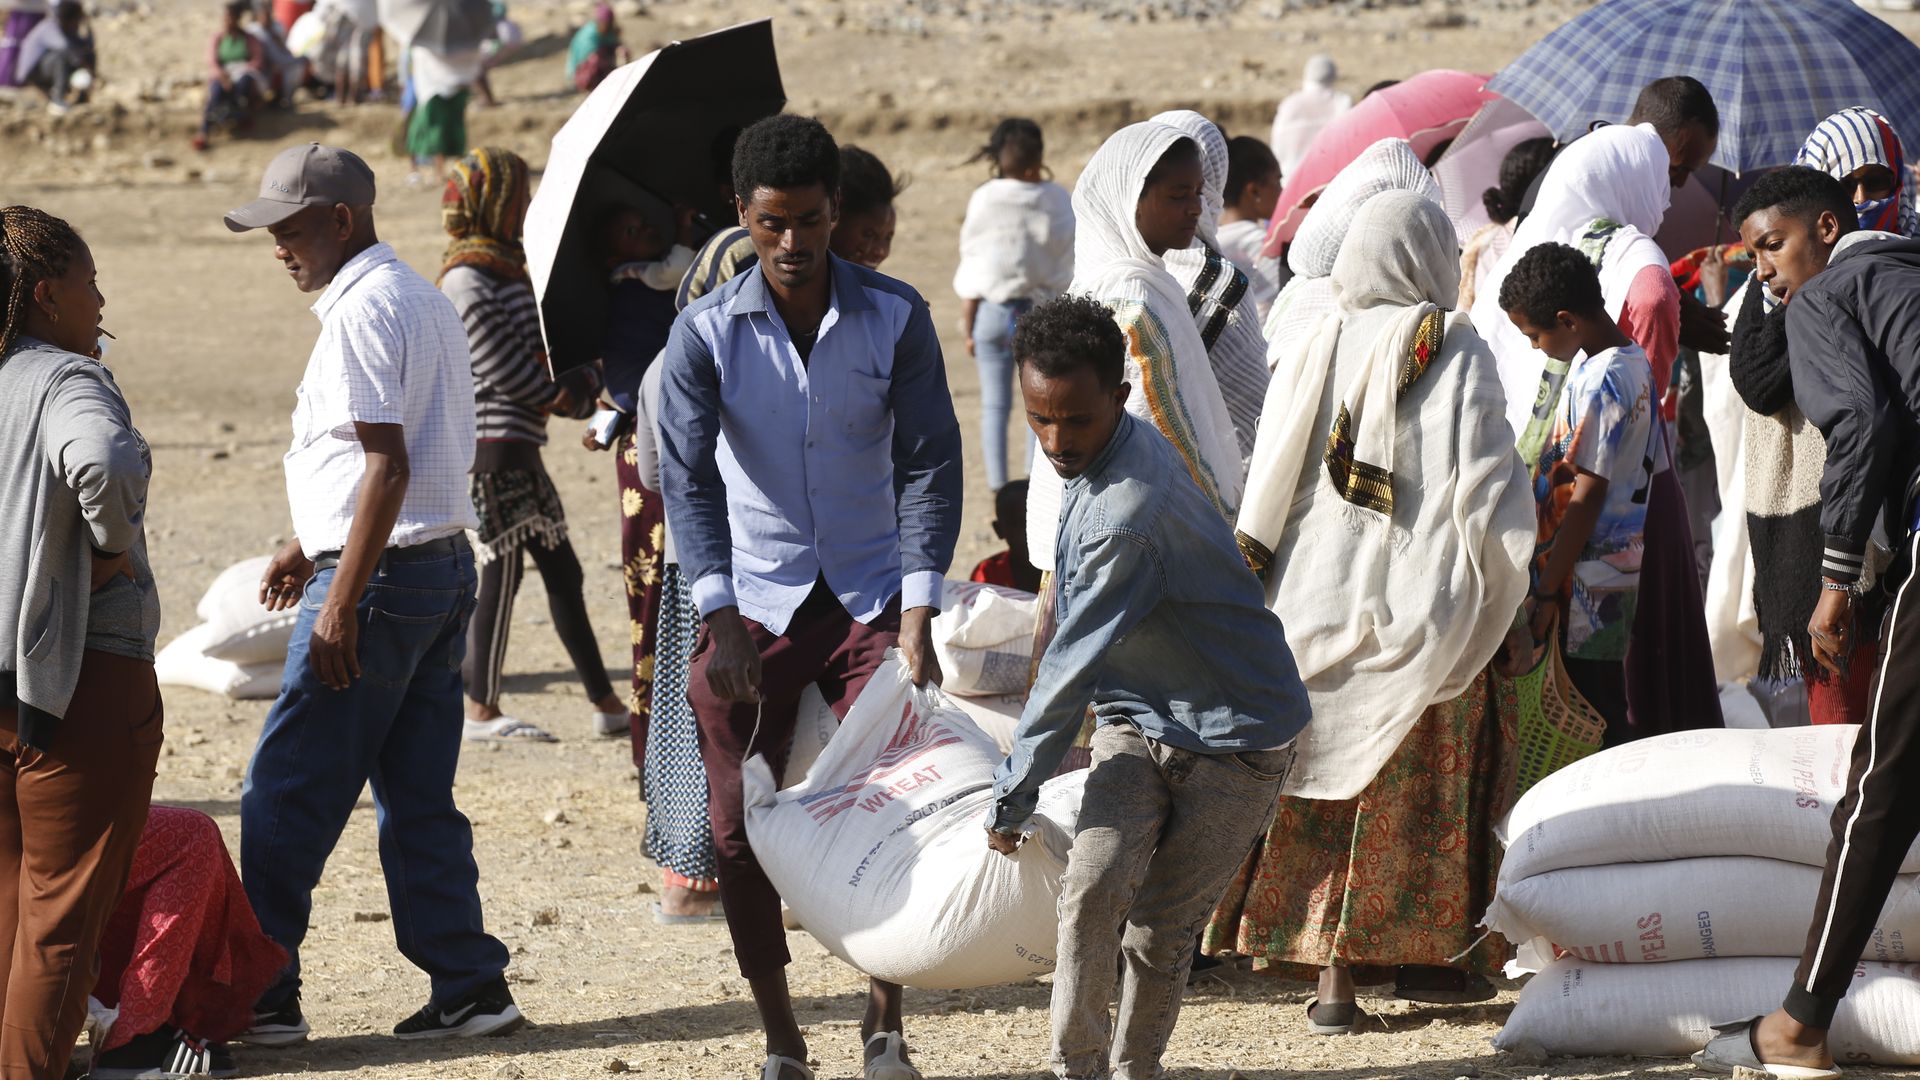 Refugees in the Tigray region collect food aid.